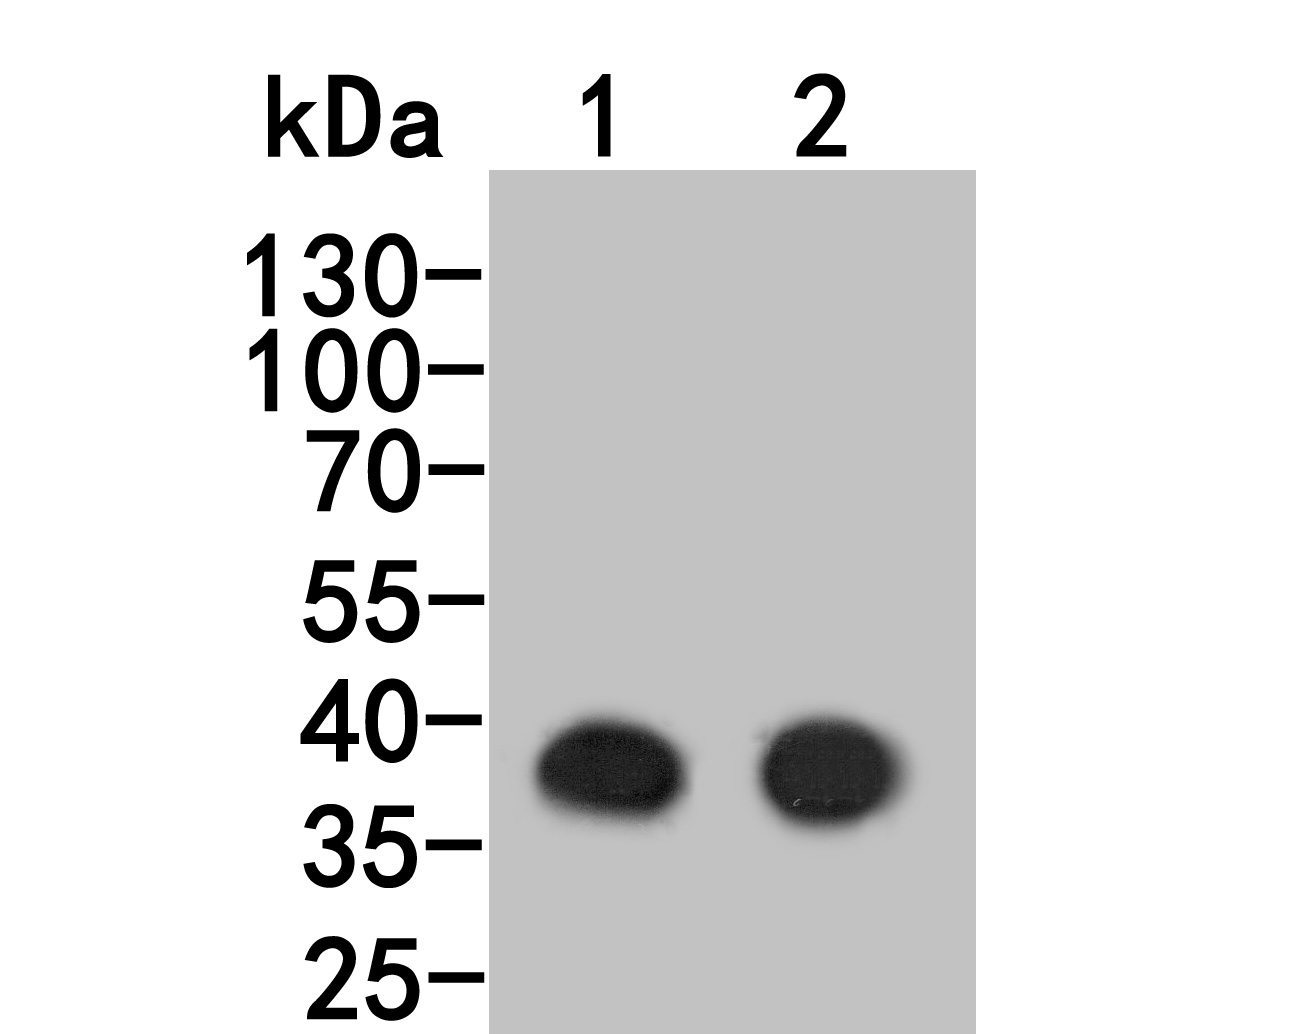 Western blot analysis of PCBP1 on different lysates. Proteins were transferred to a PVDF membrane and blocked with 5% BSA in PBS for 1 hour at room temperature. The primary antibody (HA600019, 1/500) was used in 5% BSA at room temperature for 2 hours. Goat Anti-Mouse IgG - HRP Secondary Antibody (HA1006) at 1:5,000 dilution was used for 1 hour at room temperature.<br />
Positive control:<br />
Lane 1: Hela cell lysate<br />
Lane 2: K562 cell lysate